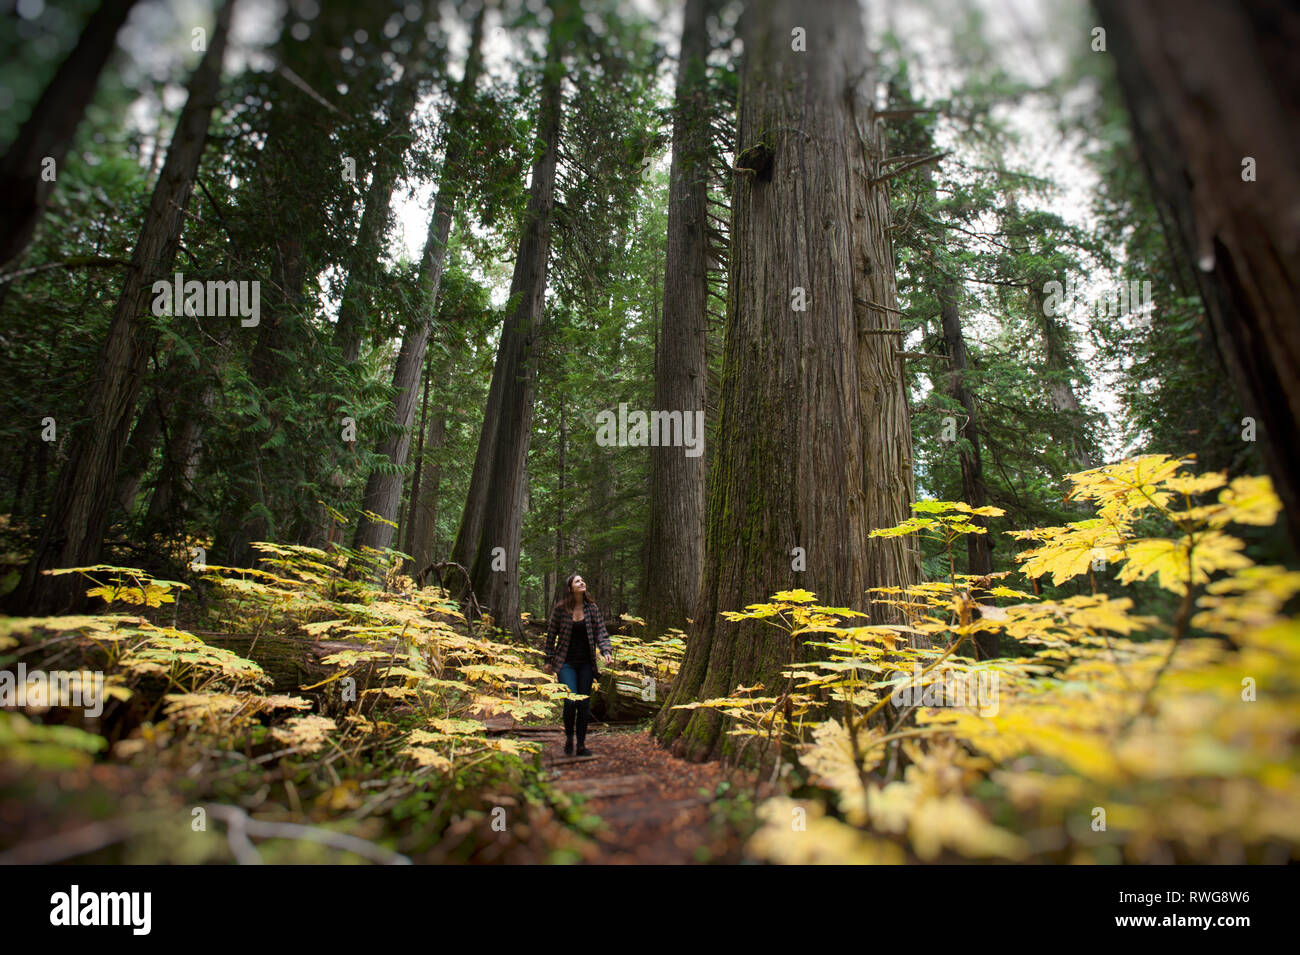 Hiking in old growth cedar forest in Kokanee Park, BC, Canada Stock Photo